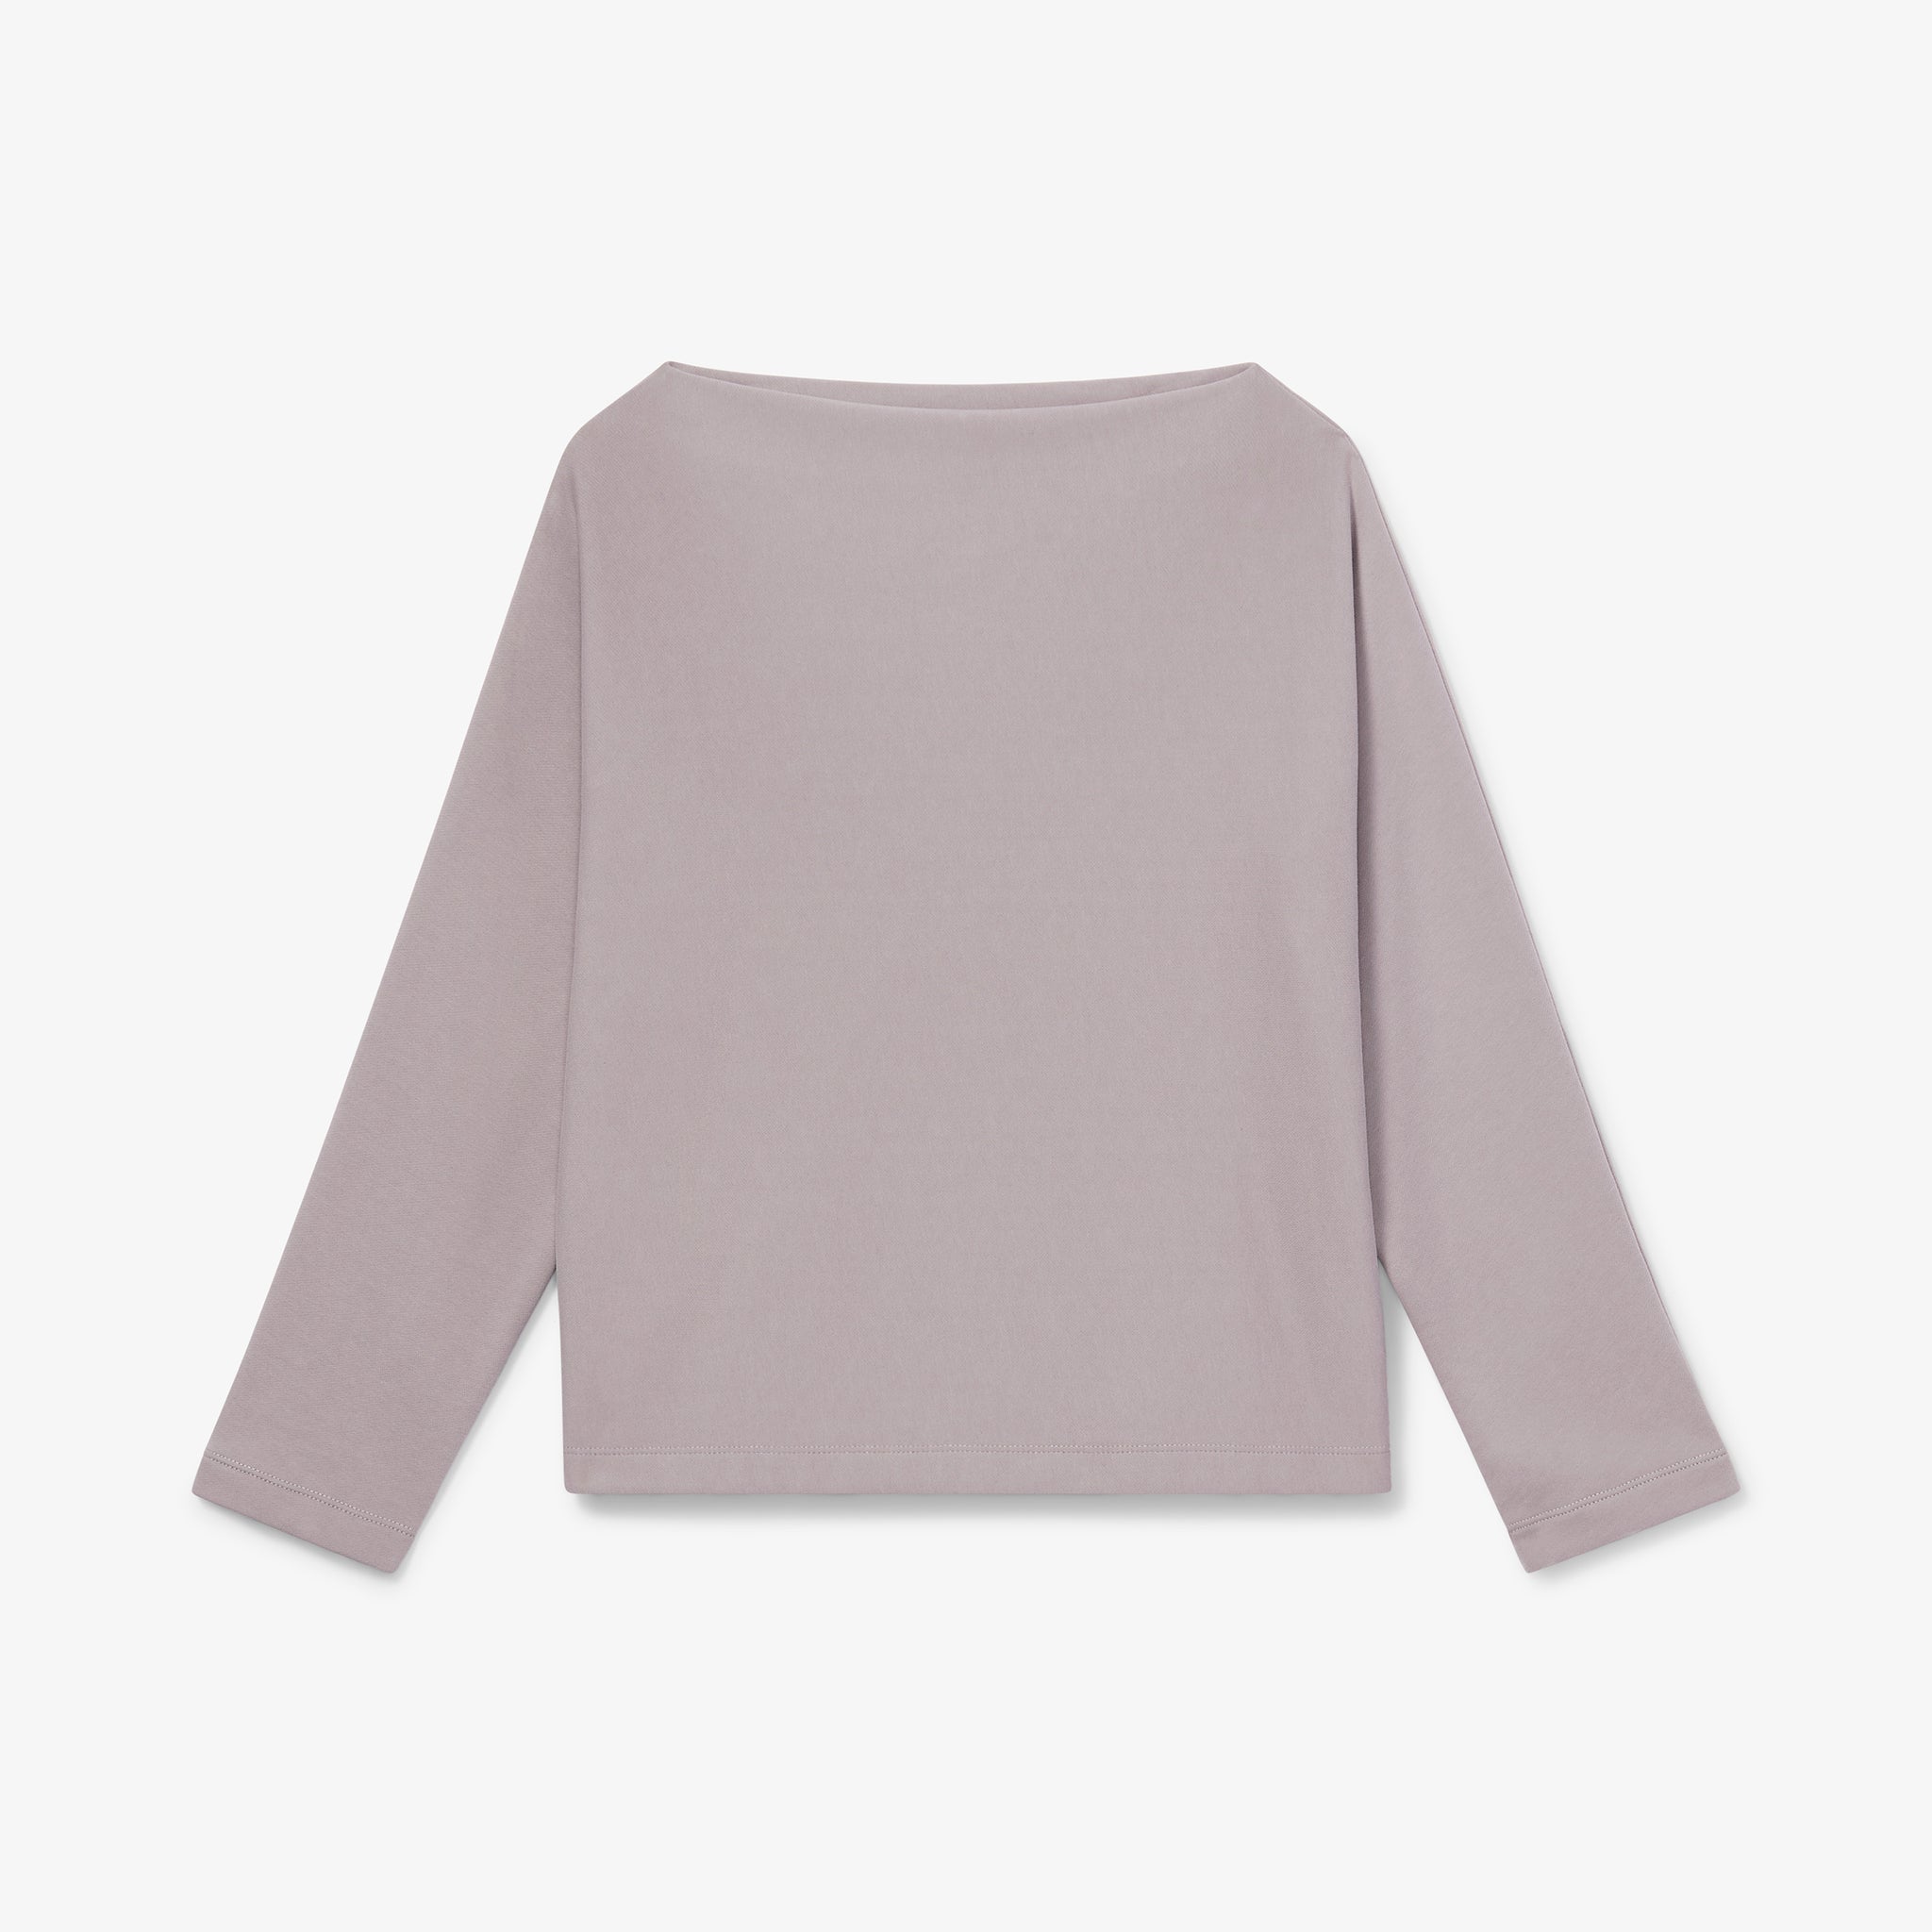 Packshot image of the Kristin Pullover - French Terry in Wisteria